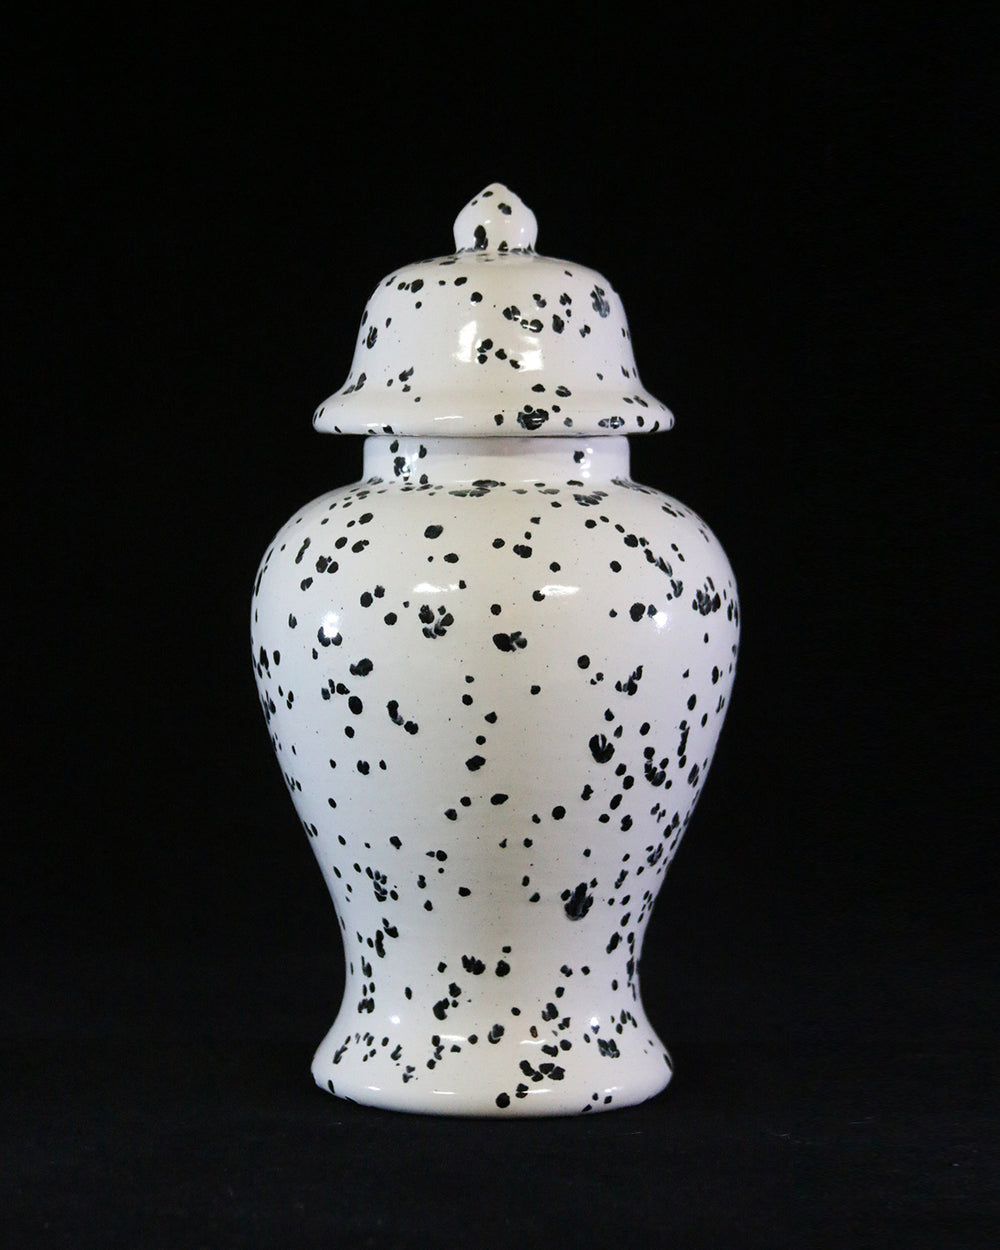 Hancrafted Ceramic Urn - Ink Spots - XLarge